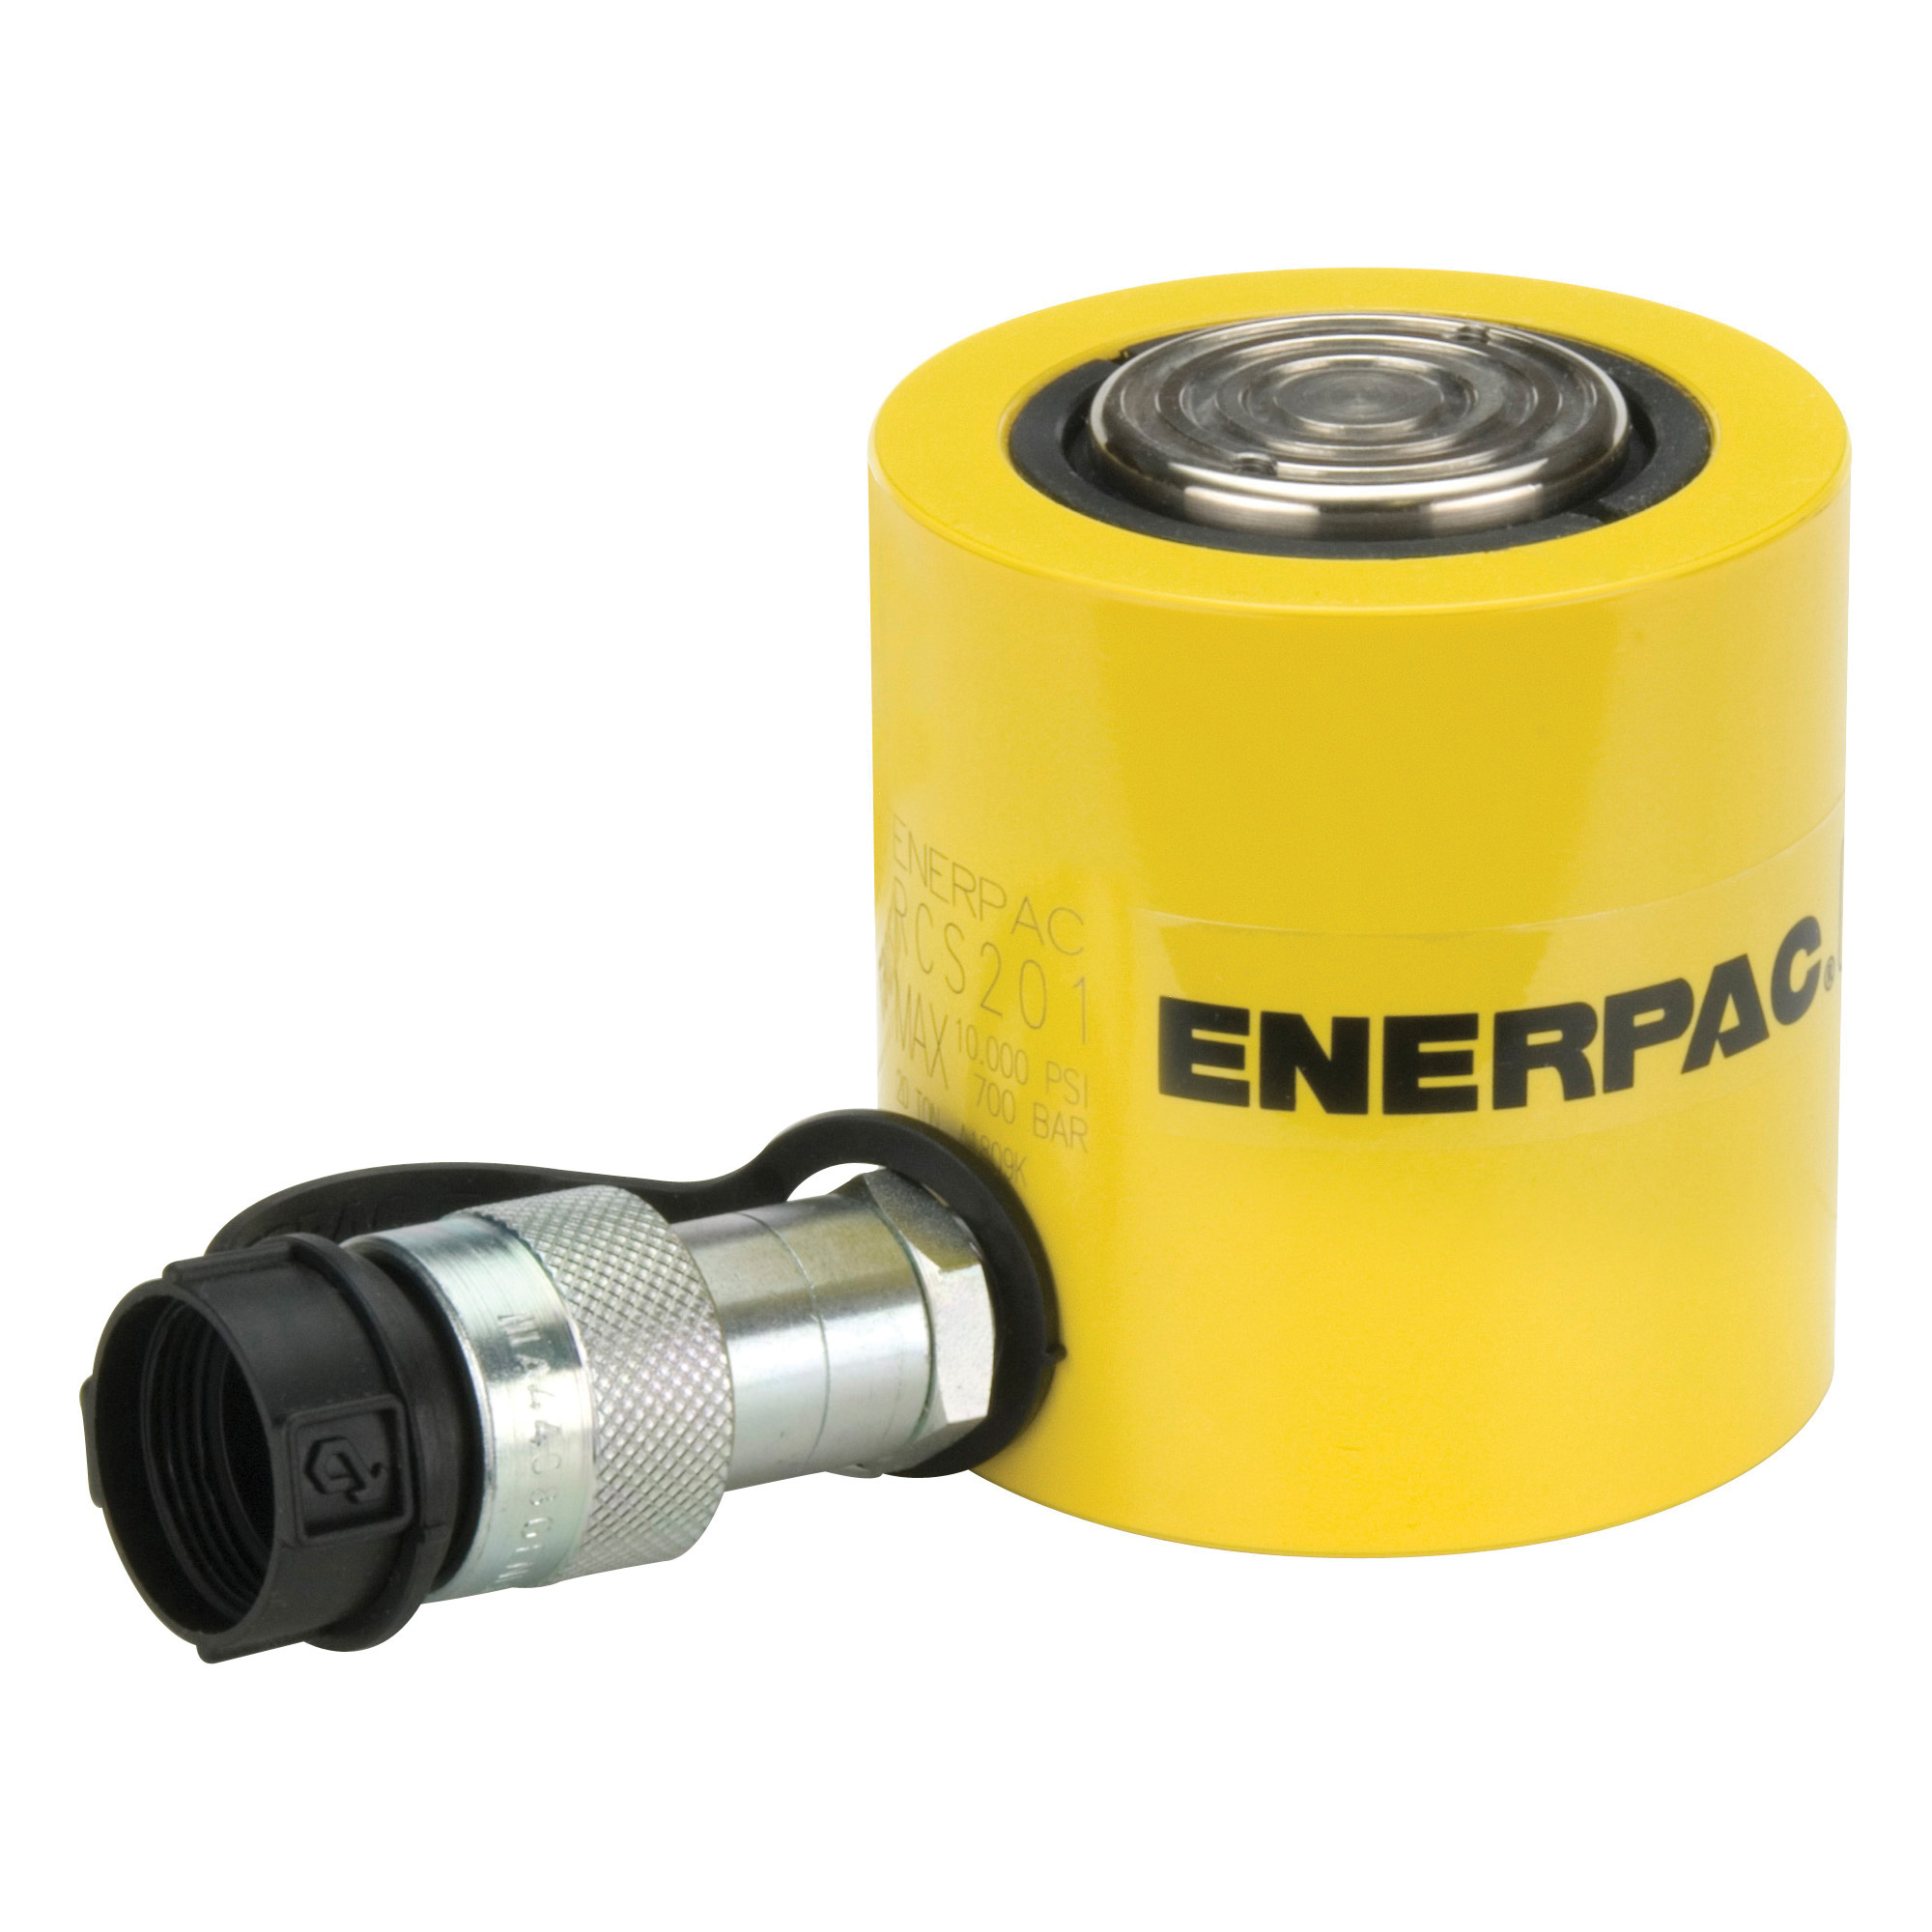 Enerpac® Flat-Jac® RCS-101 Low Height Single Acting Spring Return Hydraulic Cylinder, 10 ton Capacity, 1.69 in Dia Bore, 1-1/2 in L Stroke, 3.47 in H Retract, 1-1/2 in Dia Rod, 10000 psi